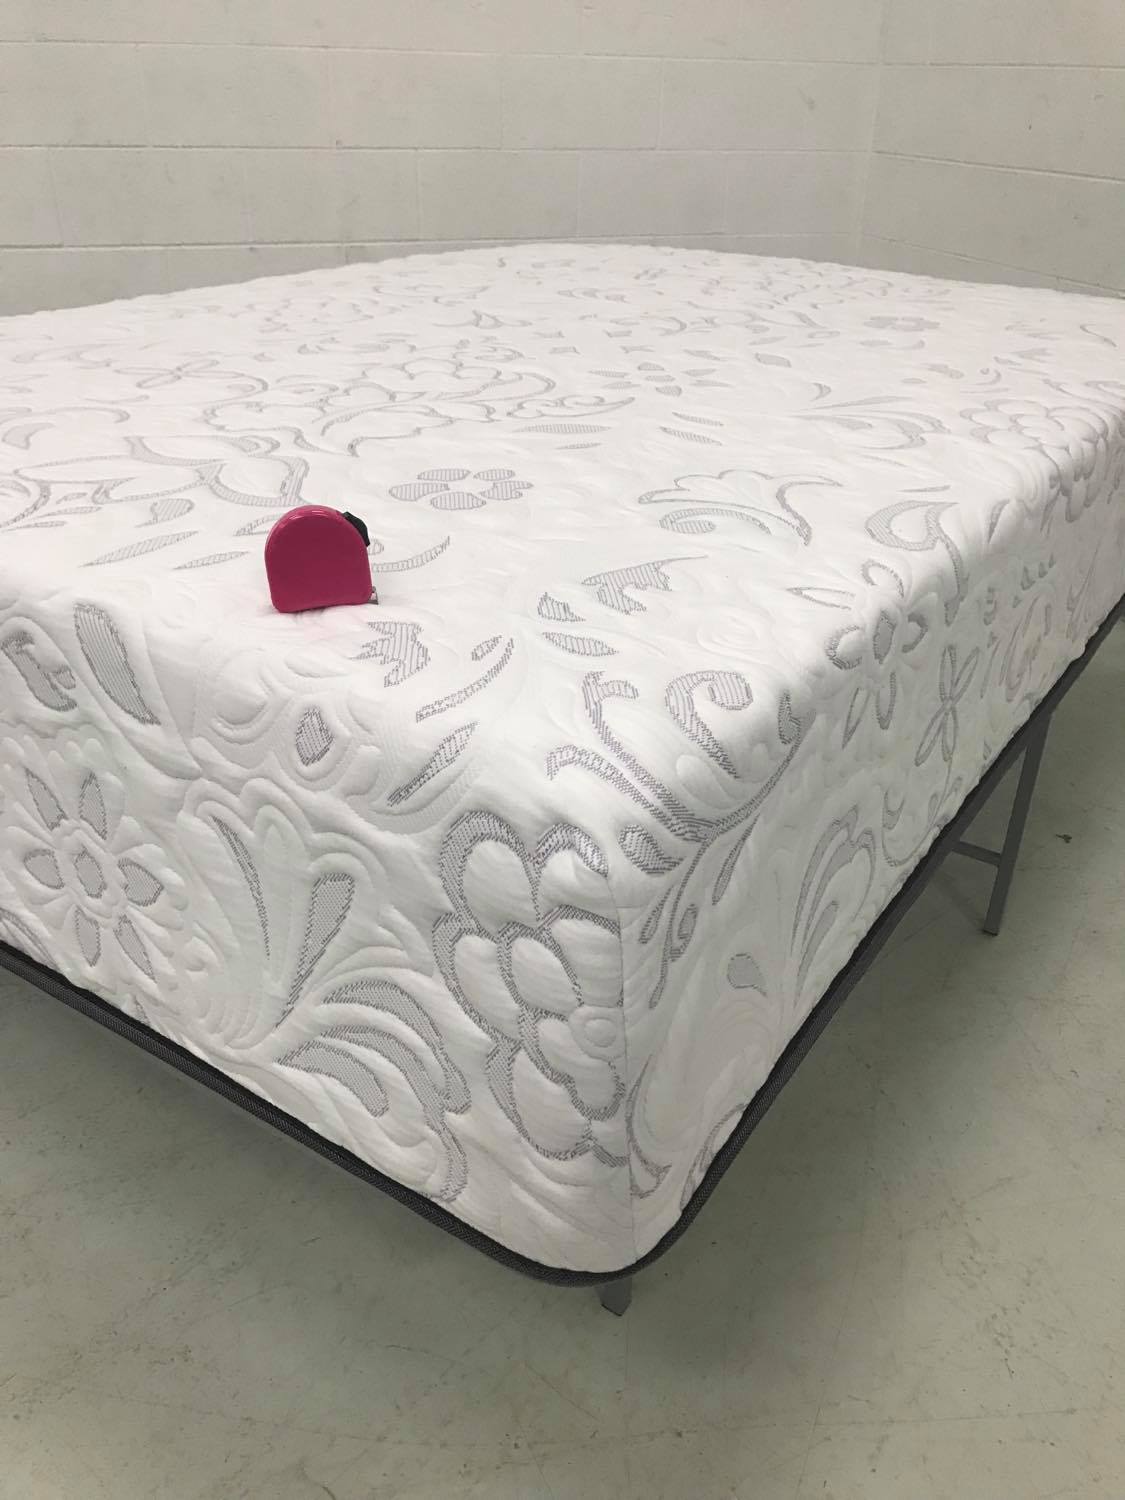 WEEKLY or MONTHLY. Purple Passion Full Mattress